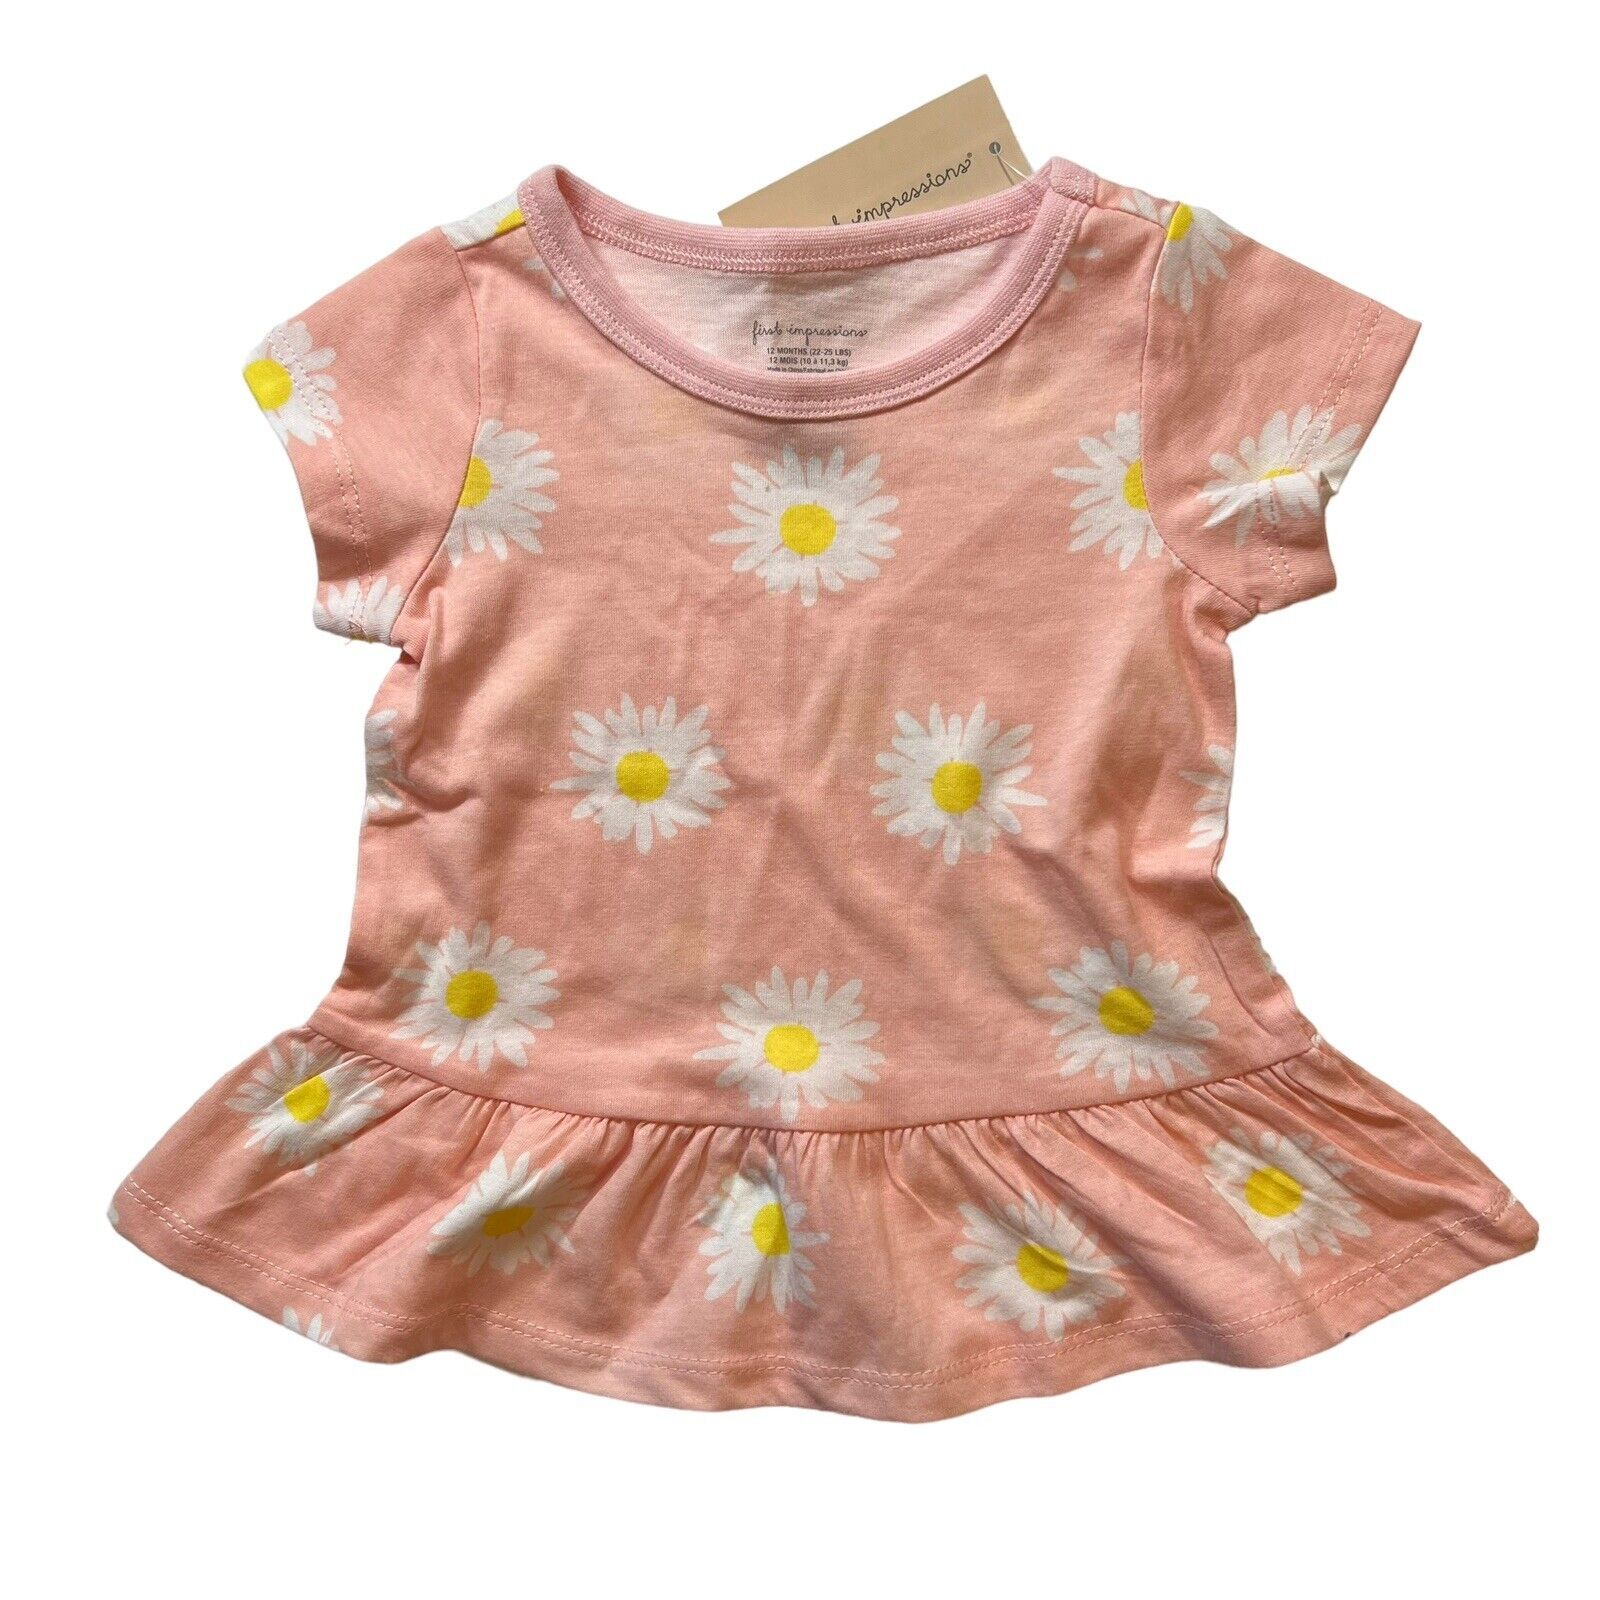 Baby Girl Pink Floral Peplum Top 12 Month New - £6.17 GBP